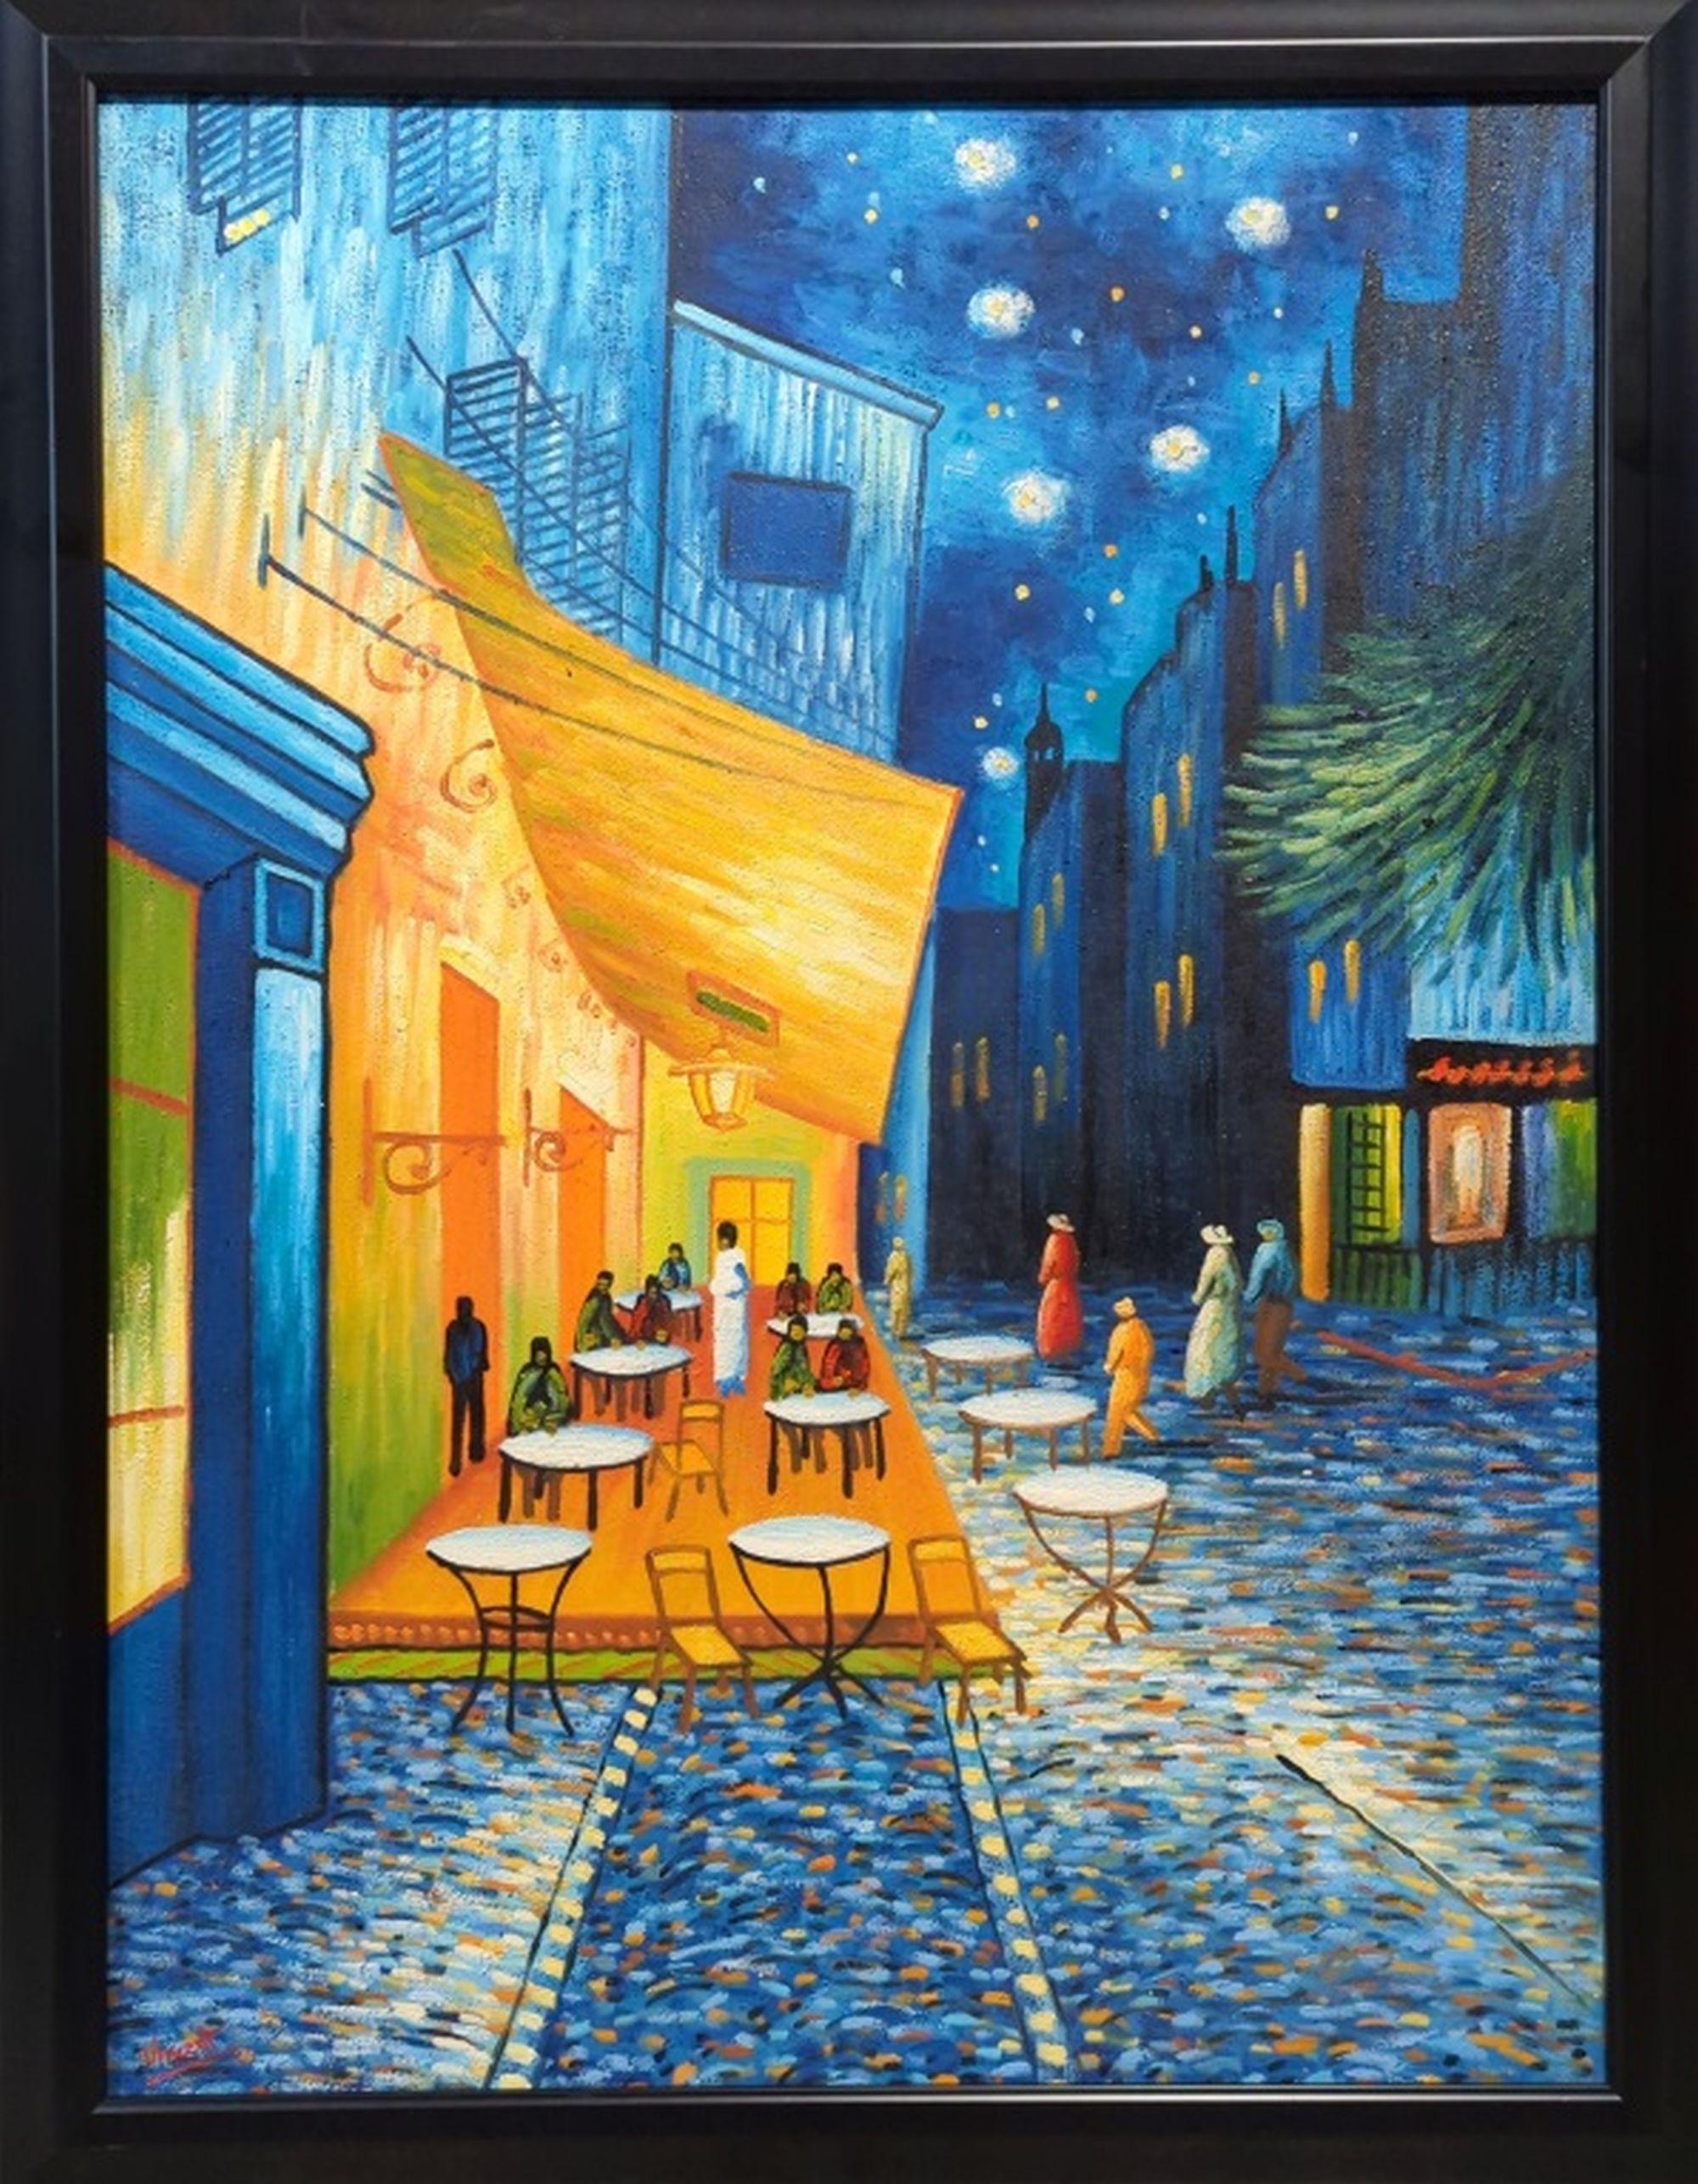 Cafe Terrace at Night by Vincent van Gogh